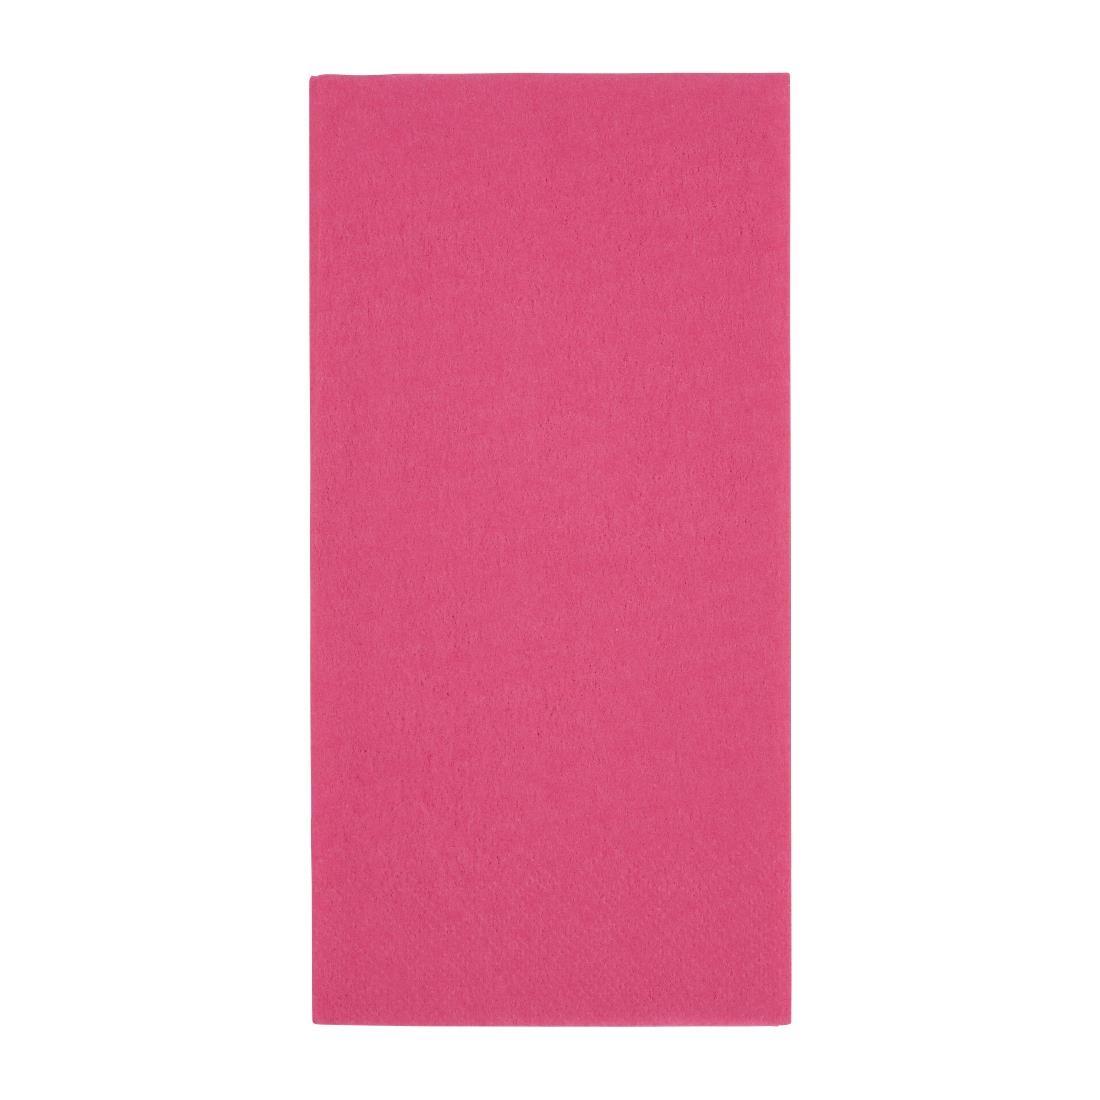 Fiesta Recyclable Premium Tablin Dinner Napkin Pink 40x40cm Airlaid 1/8 Fold (Pack of 500) - FE273  - 1